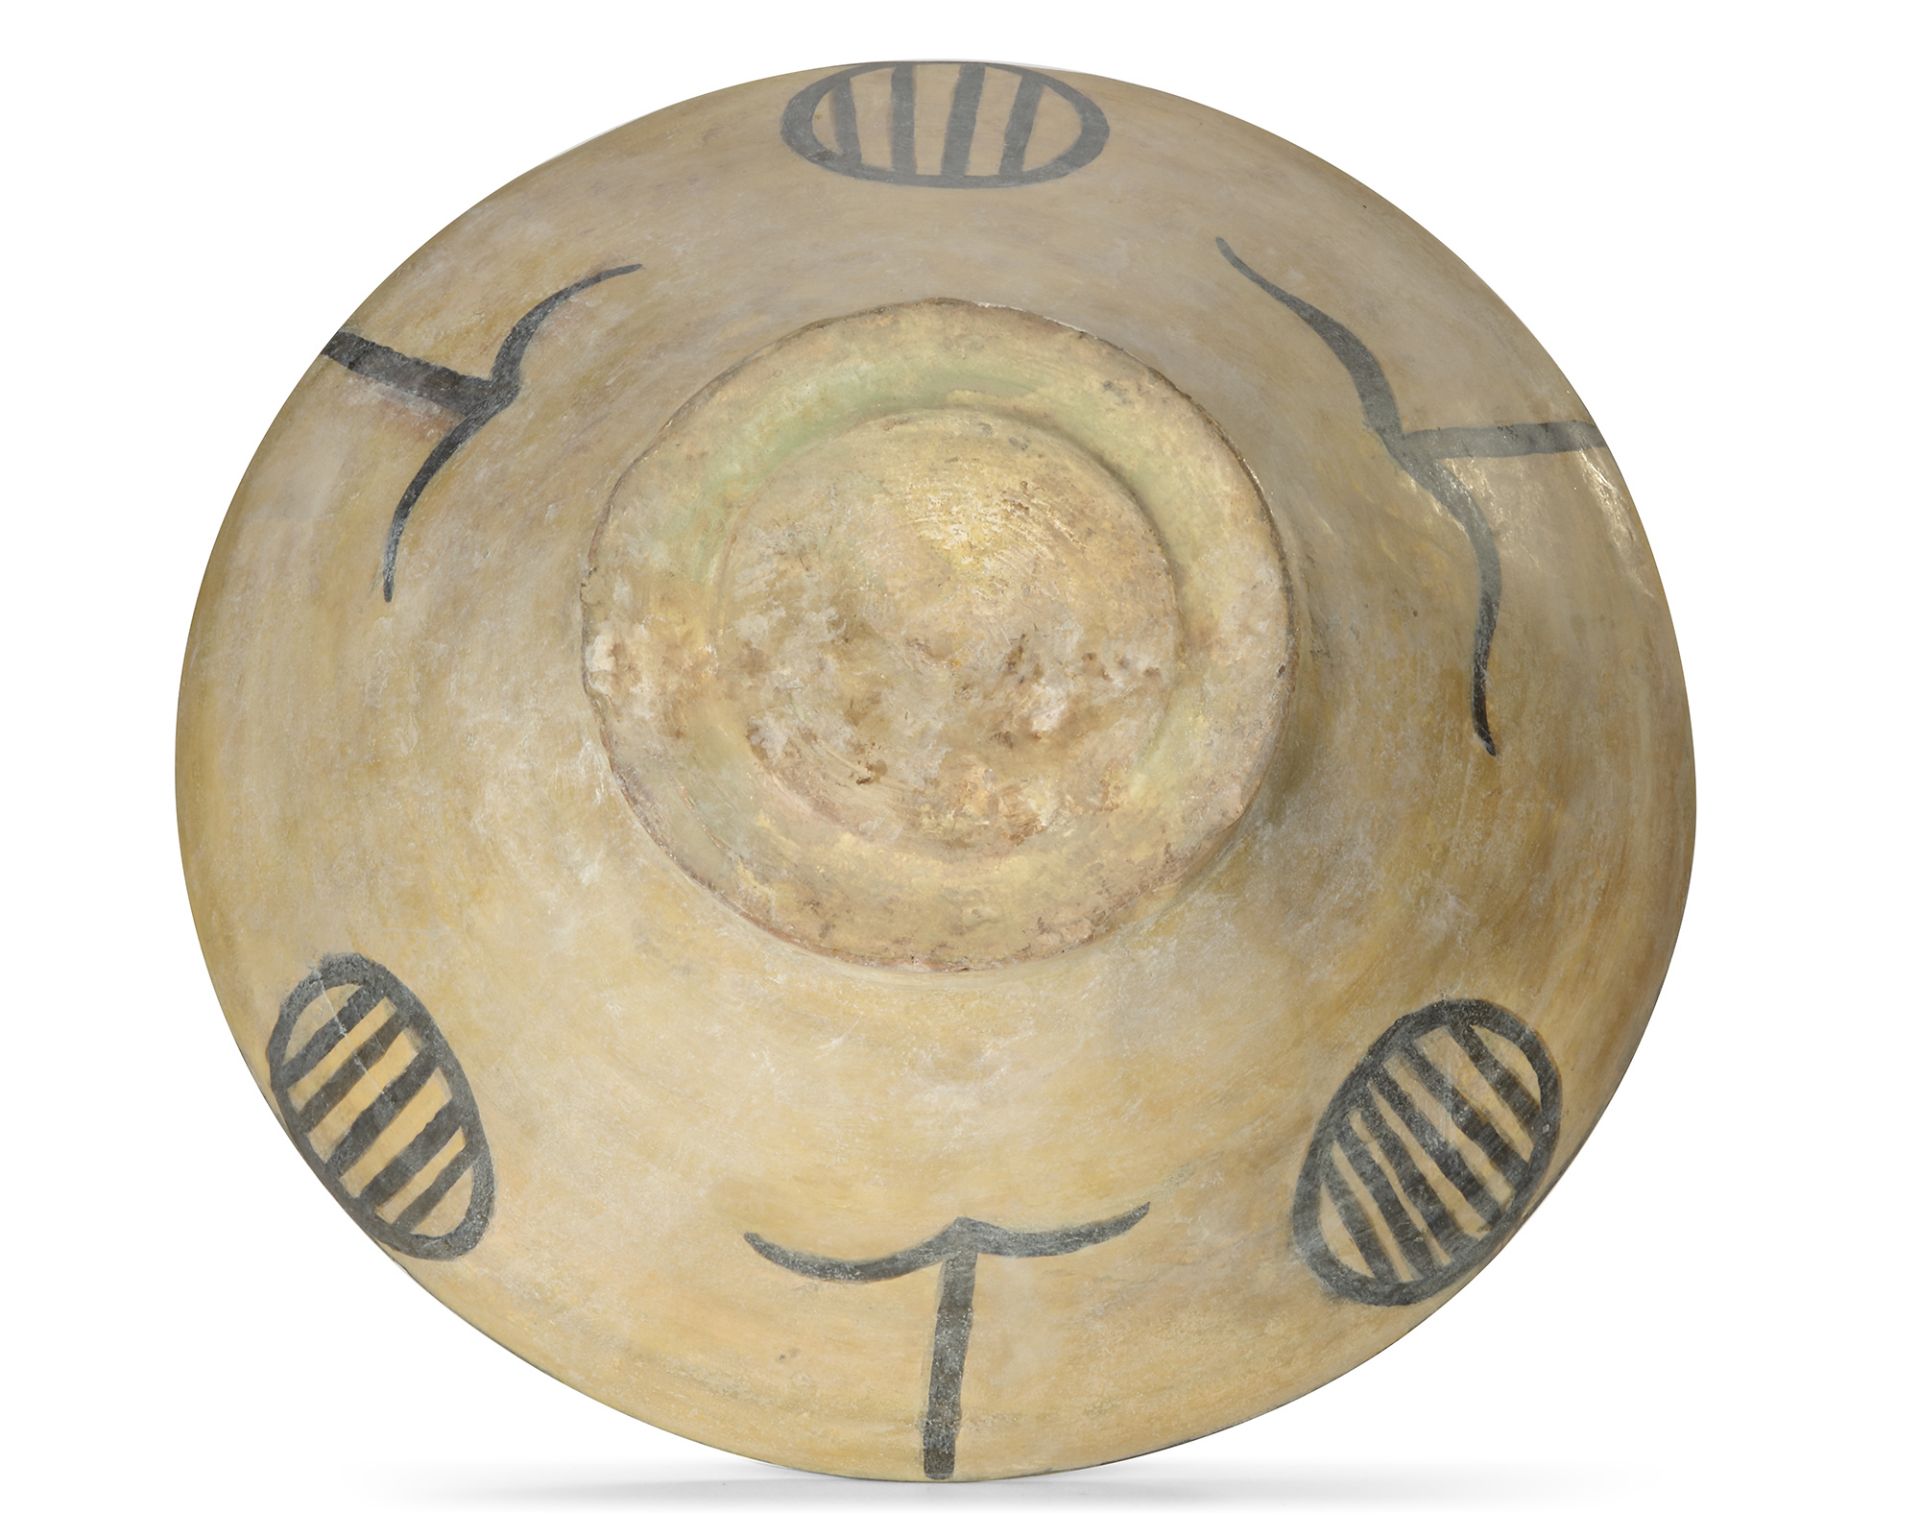 A NISHAPUR POTTERY BOWL, EASTERN PERSIA, 10TH CENTURY - Image 9 of 10